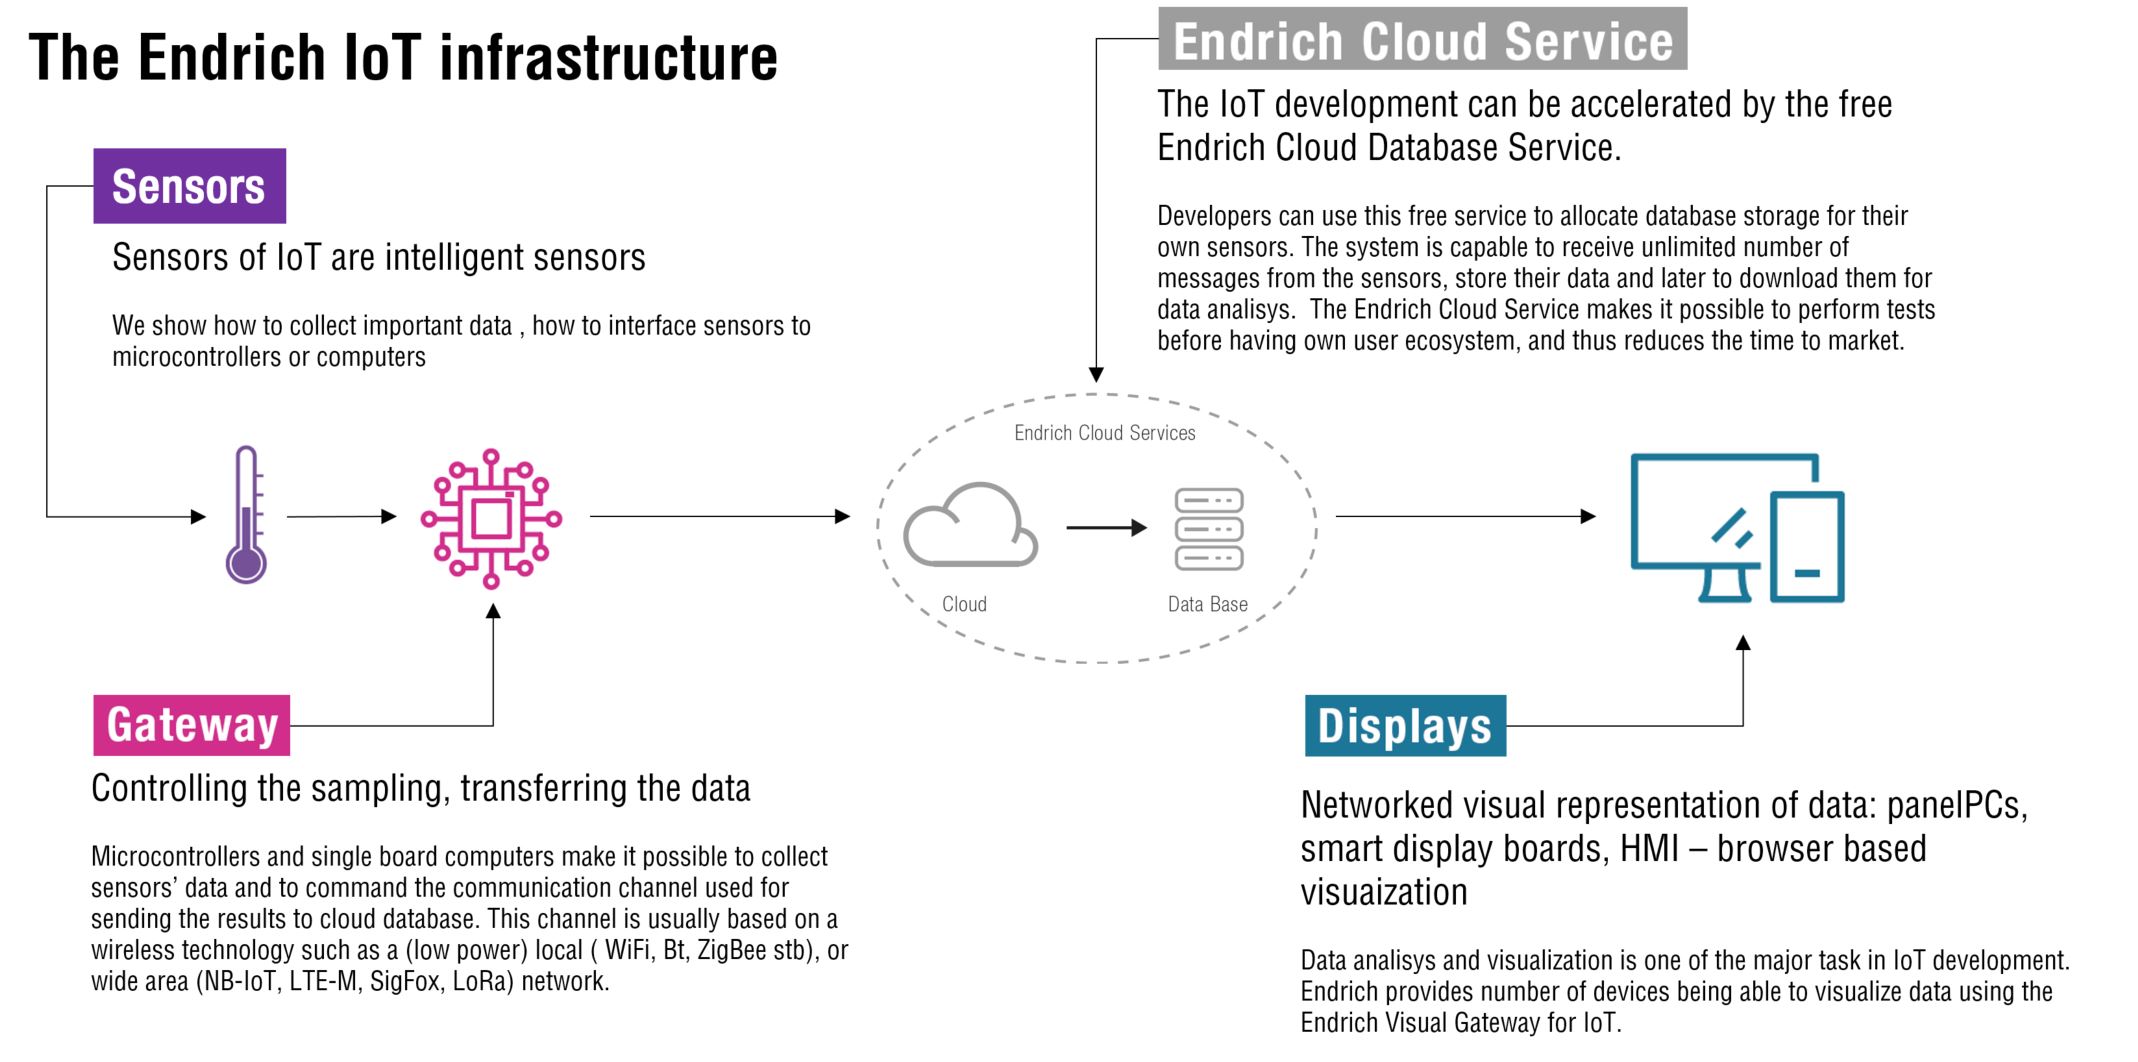 4: IoT chain structure, and Endrich’s component support for the infrastructure